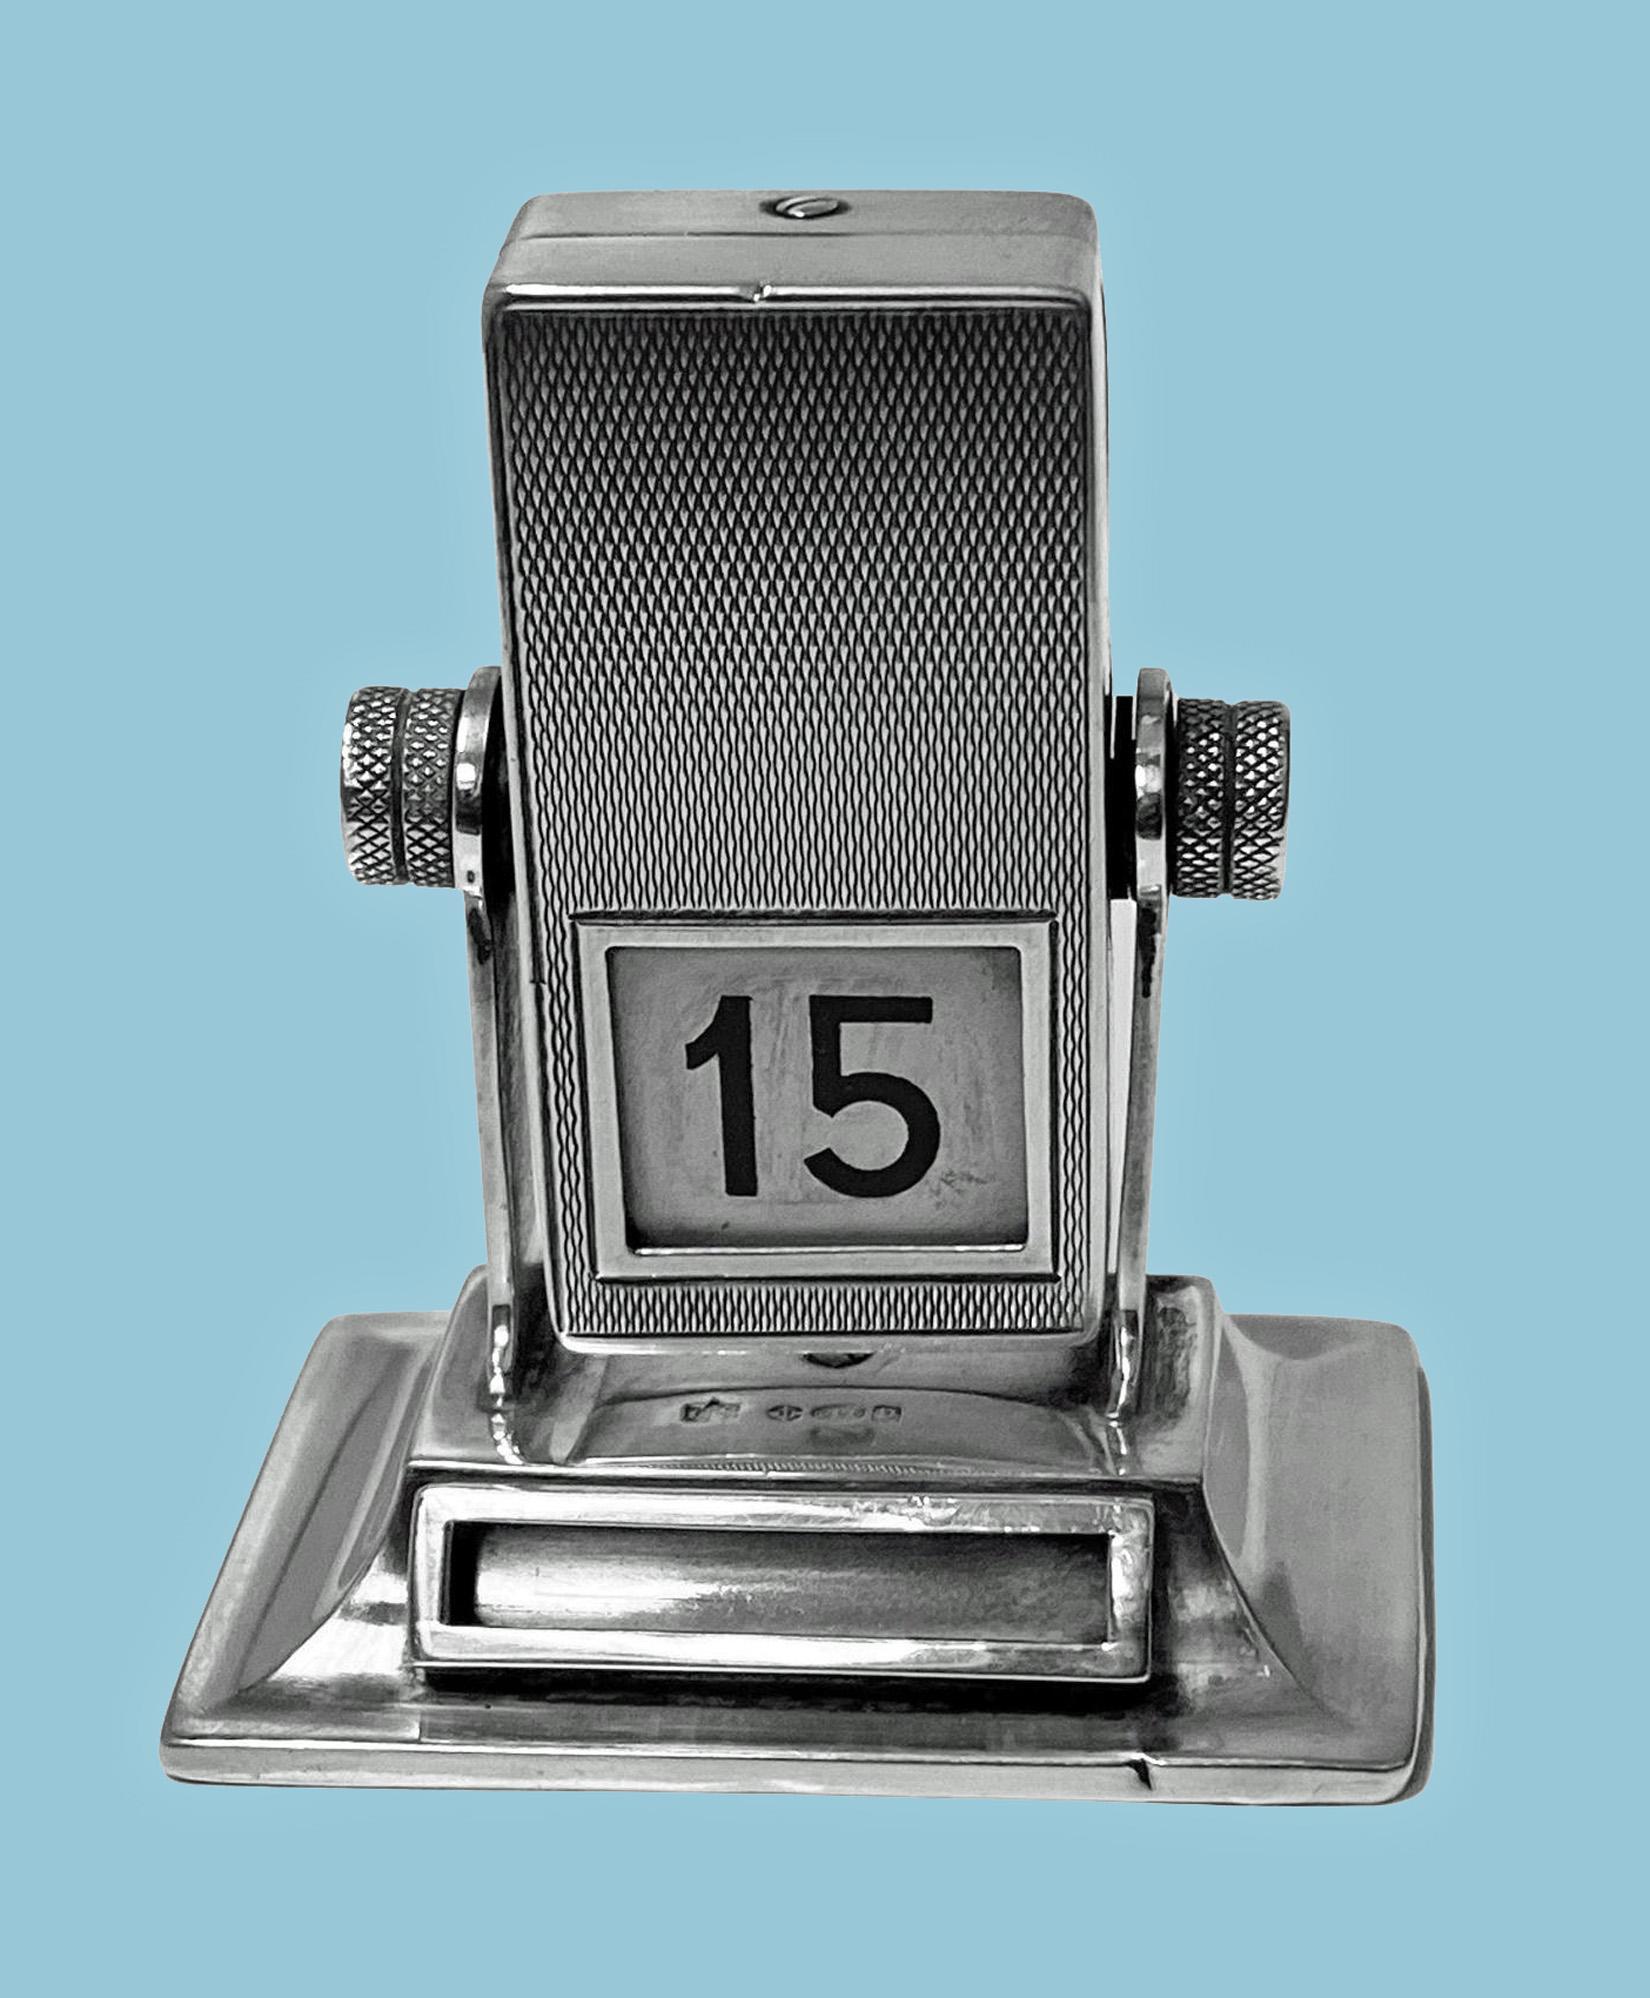 Rare English Sterling silver mechanical rotating desk calendar, London 1930 Stockwell and Co. The calendar on plain moulded base; central rotating calendar of engine turned and polished plain silver. The silver calendar section rotates on a silver